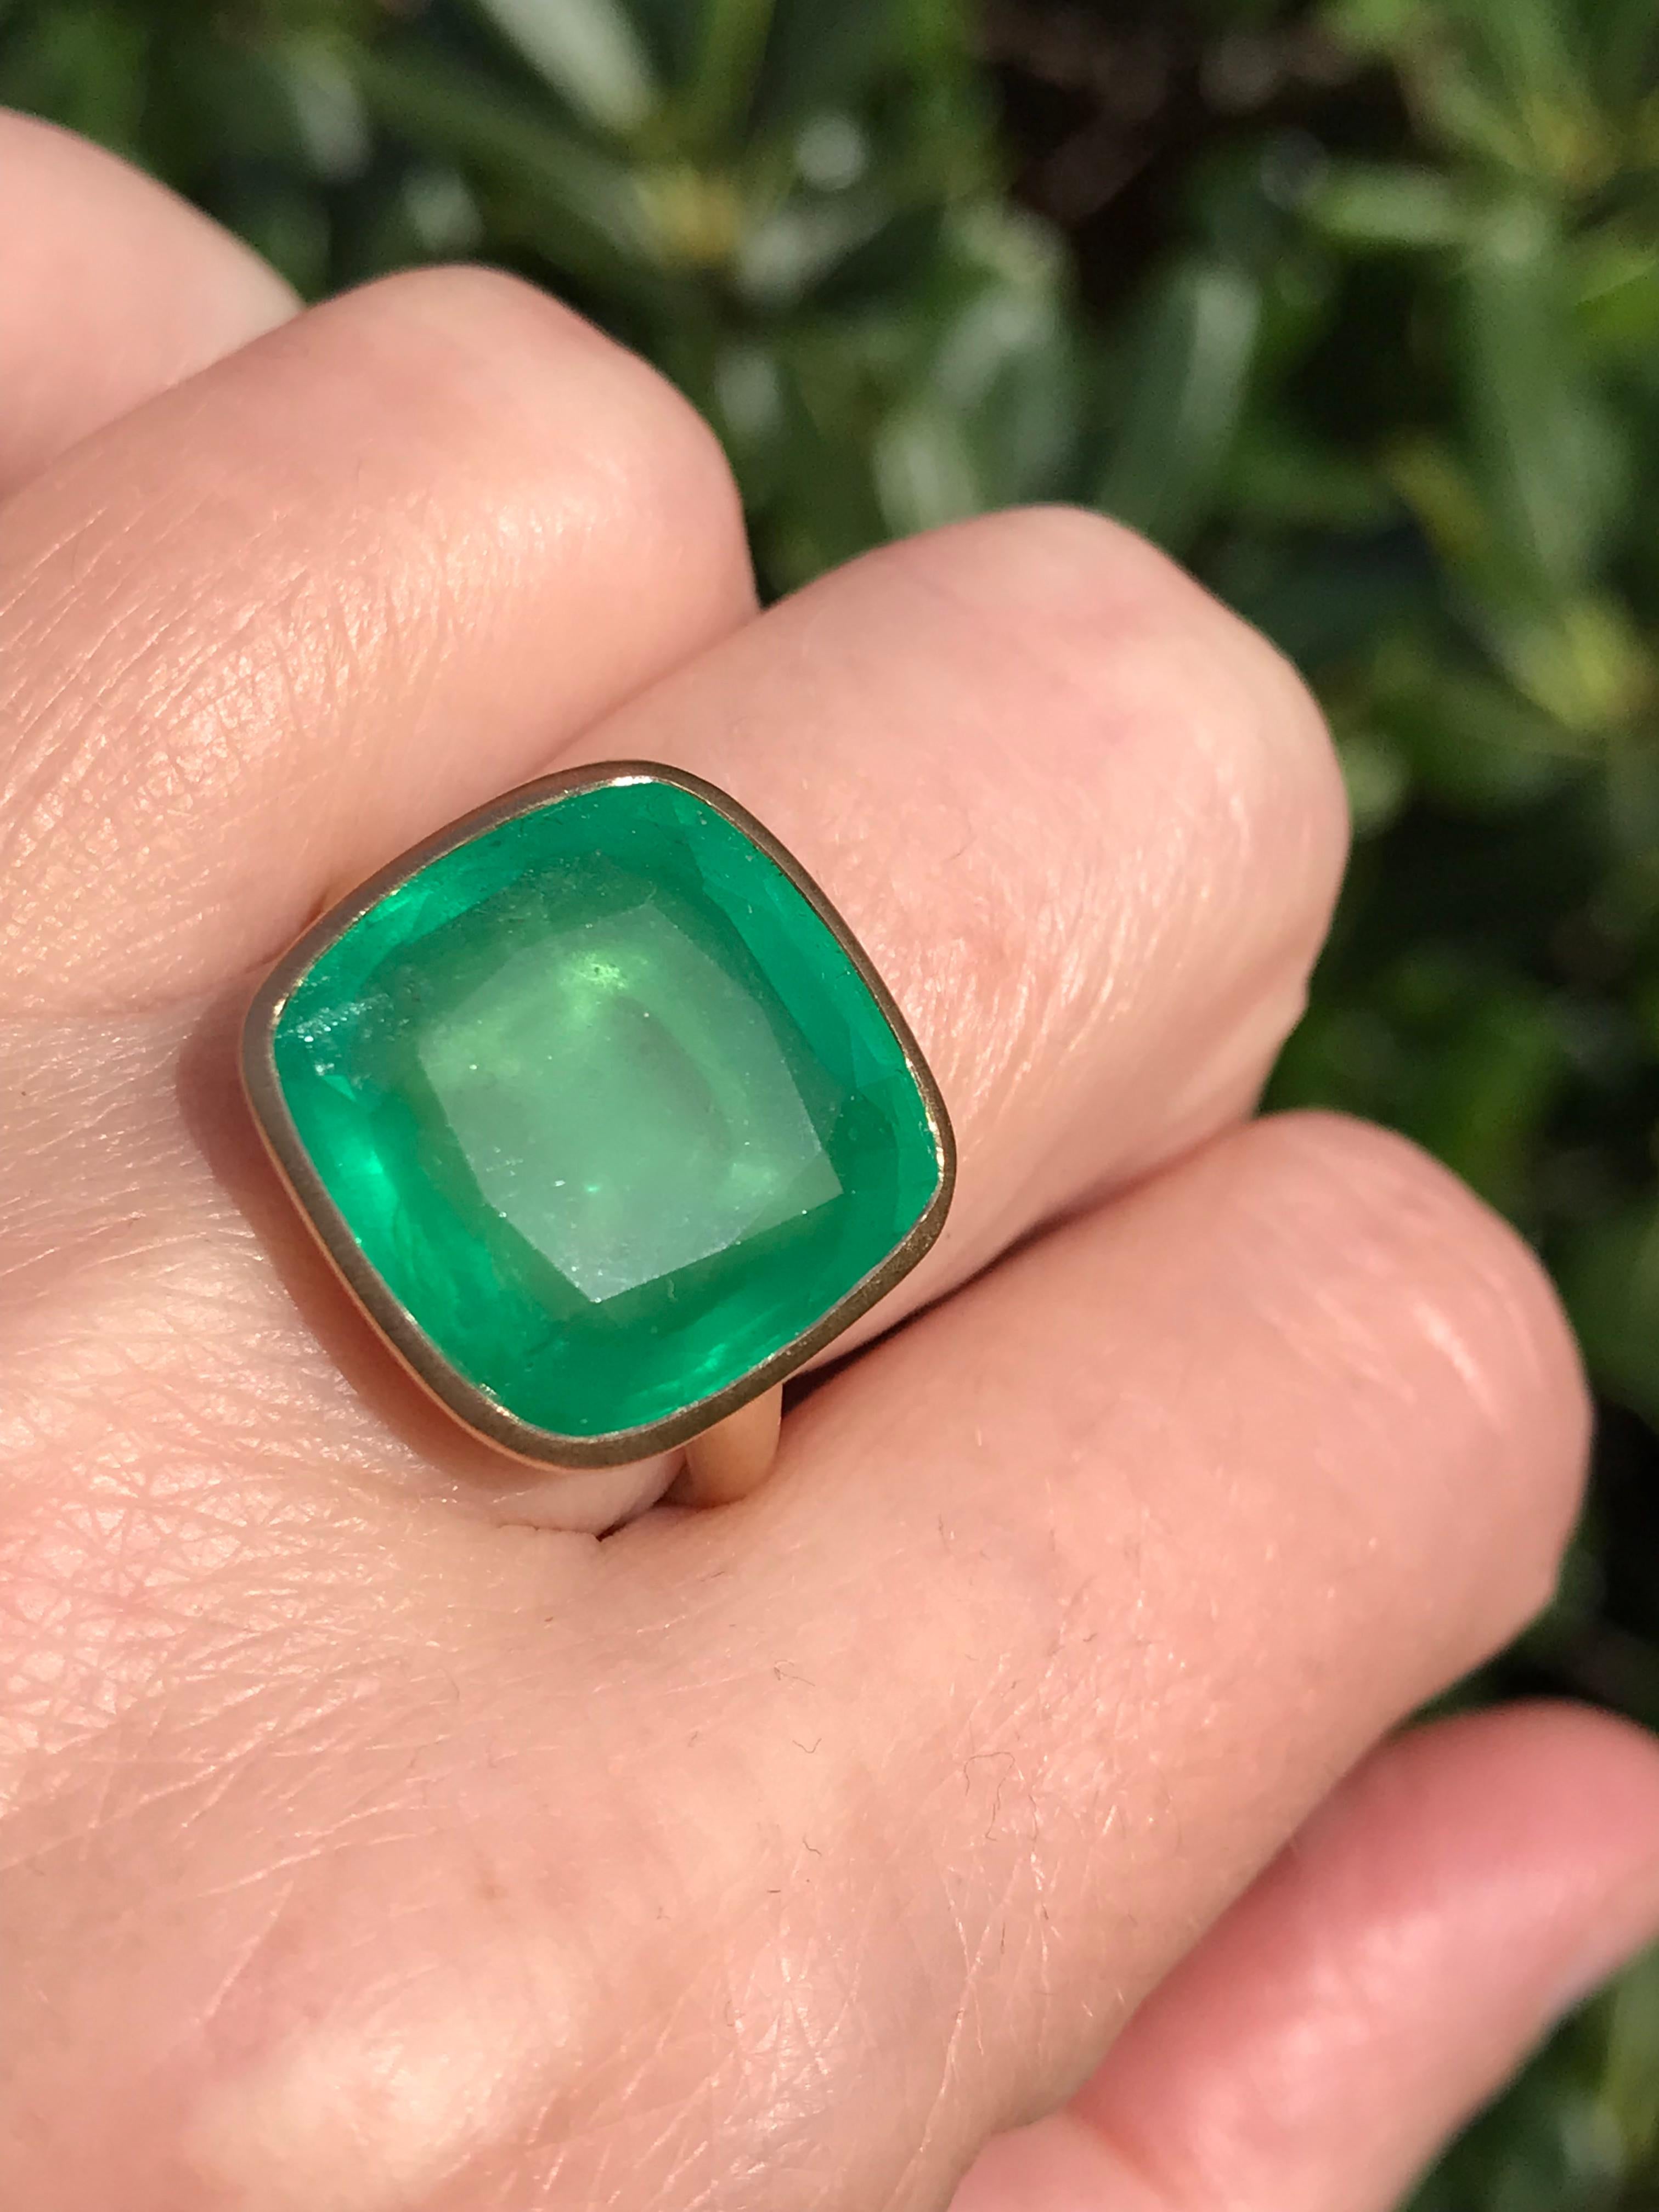 Dalben design One of a Kind 18k yellow gold satin finishing ring with a 12,04 carat cushion cut emerald. 
Ring size7+ USA , 55 EU  re-sizable to most finger sizes. 
Bezel stone dimensions :
width 16,8 mm
height 16,2 mm
The ring has been designed and